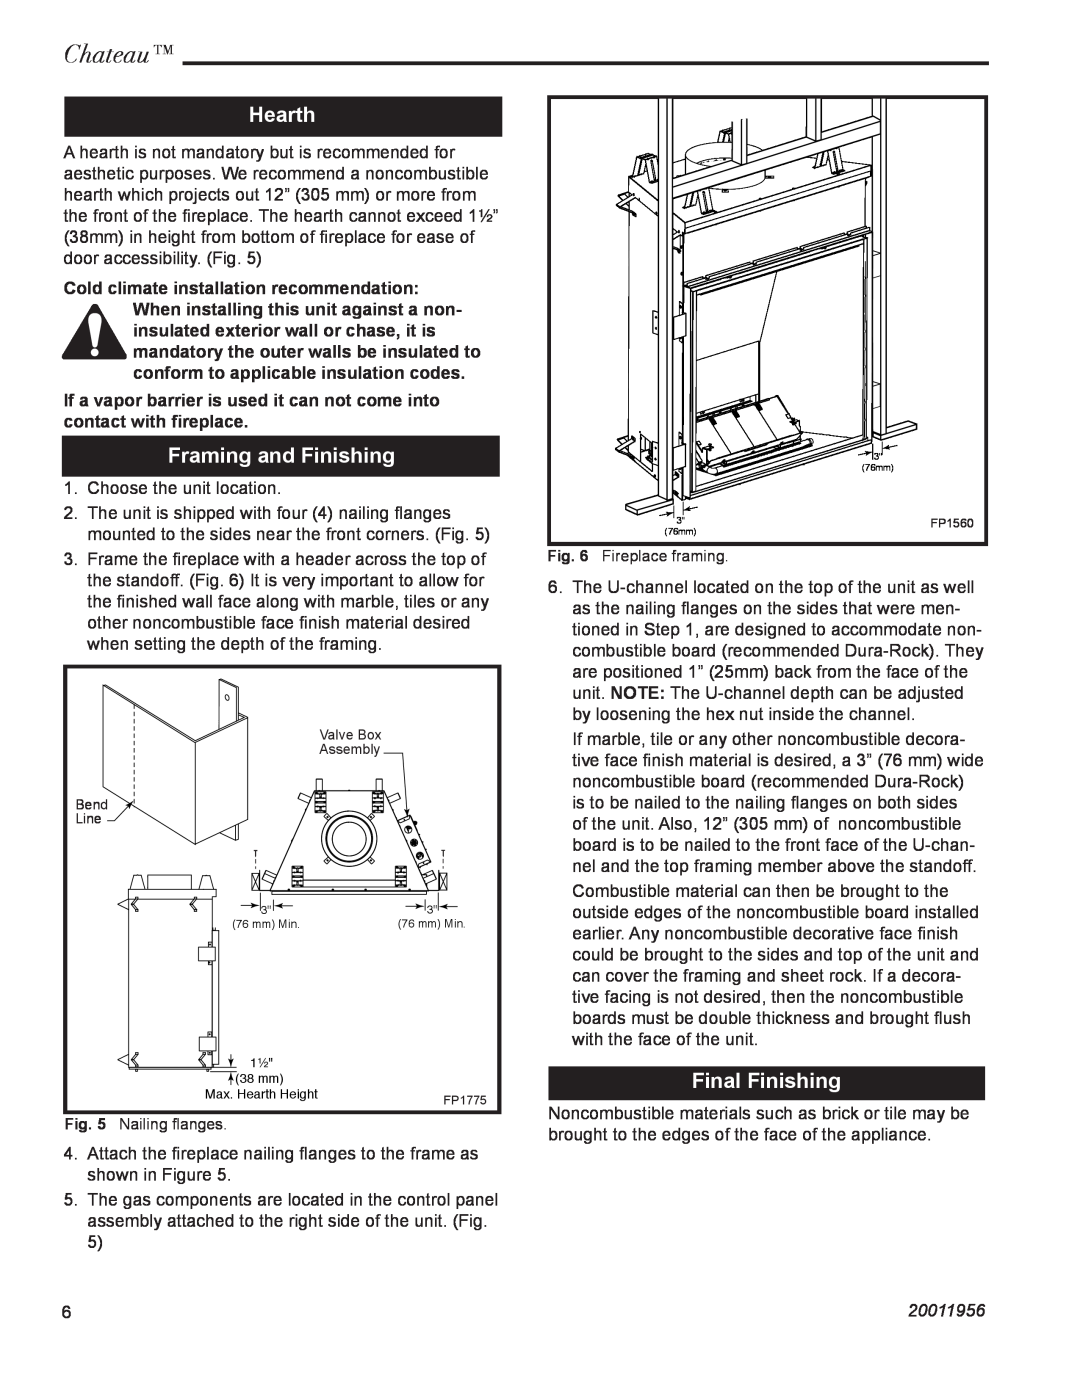 Vermont Casting DVT44 installation instructions Hearth, Framing and Finishing, Final Finishing, Chateau, 20011956 